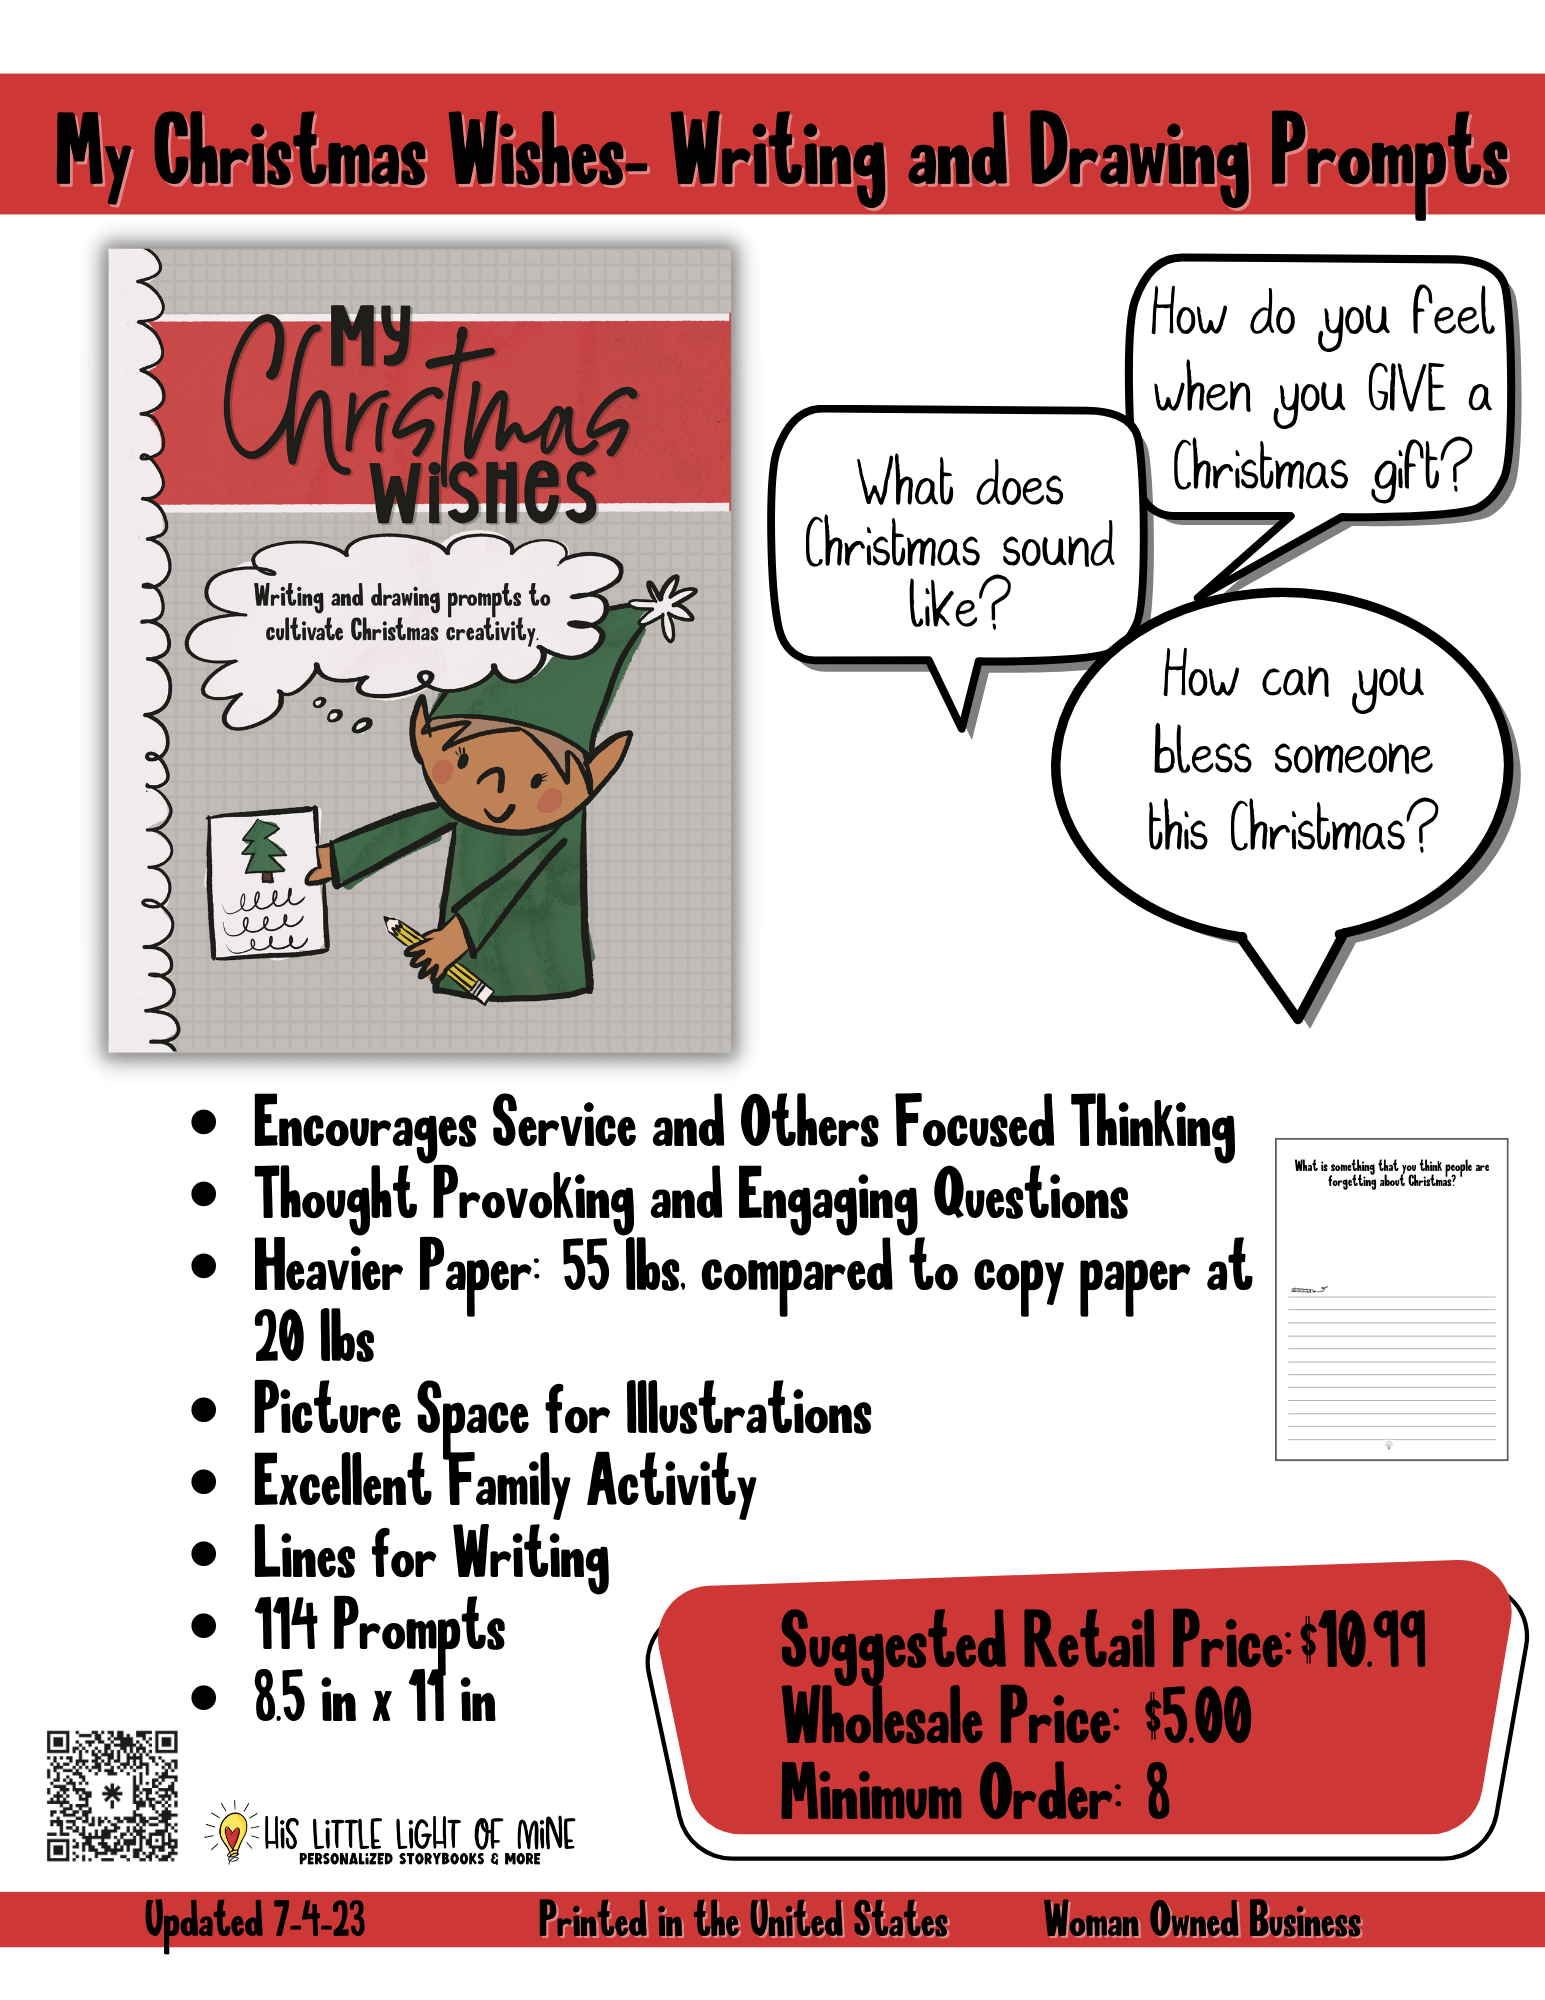 Wholesale ad of the children’s Christmas drawing and writing prompt book called “My Christmas Wishes” self-published through Amazon Kindle Direct Publishing